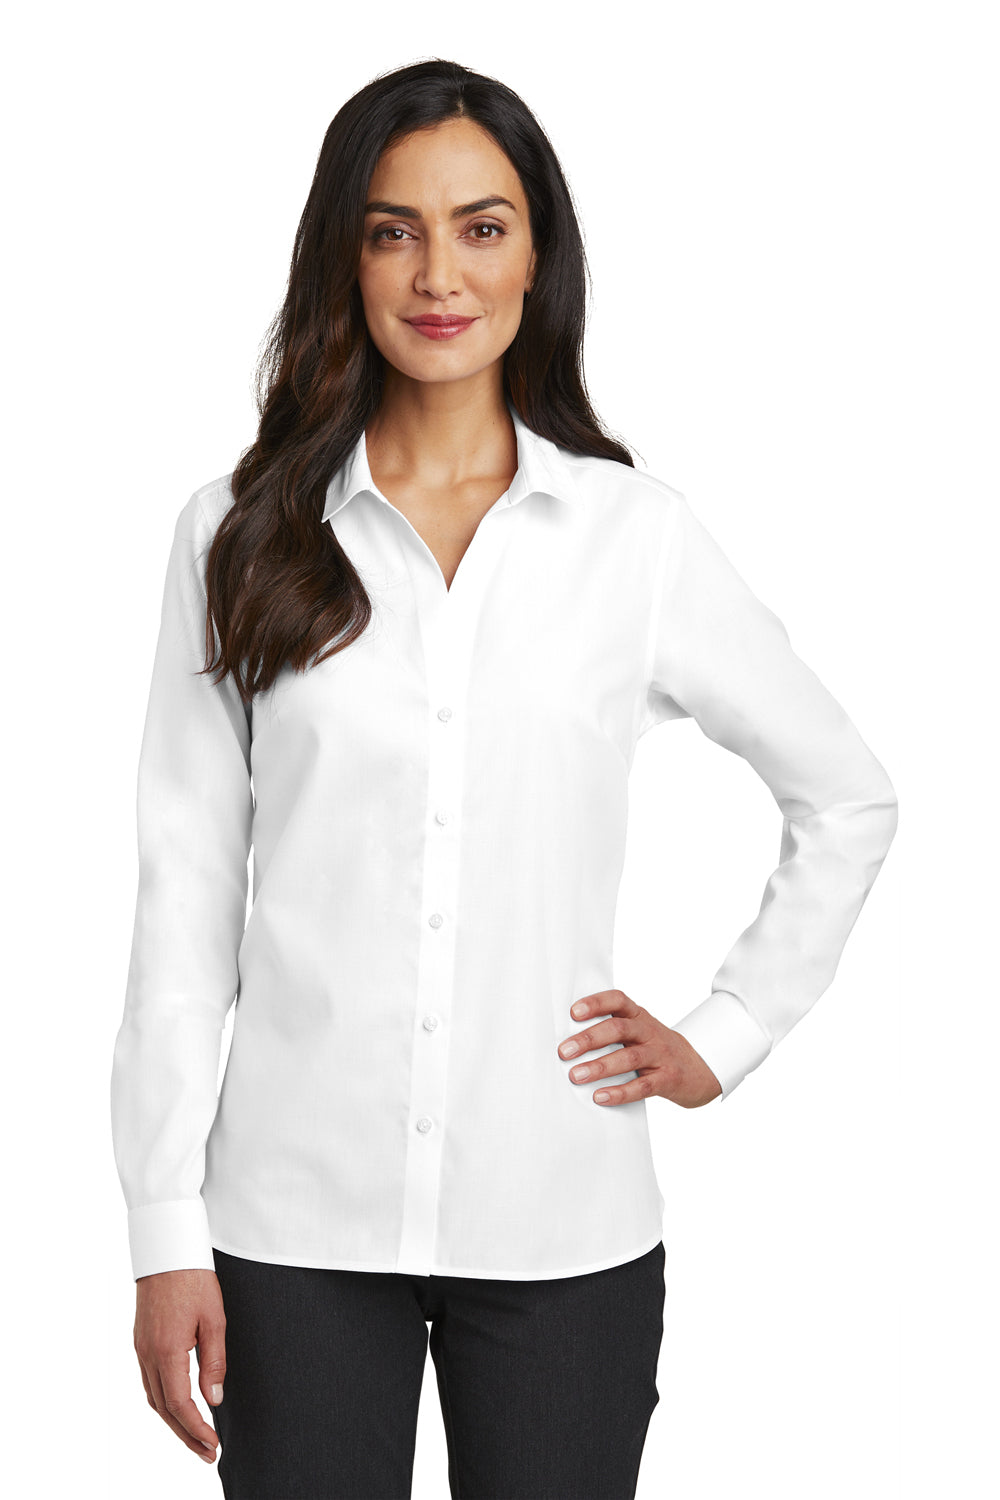 Red House RH470 Womens Nailhead Wrinkle Resistant Long Sleeve Button Down Shirt White Front